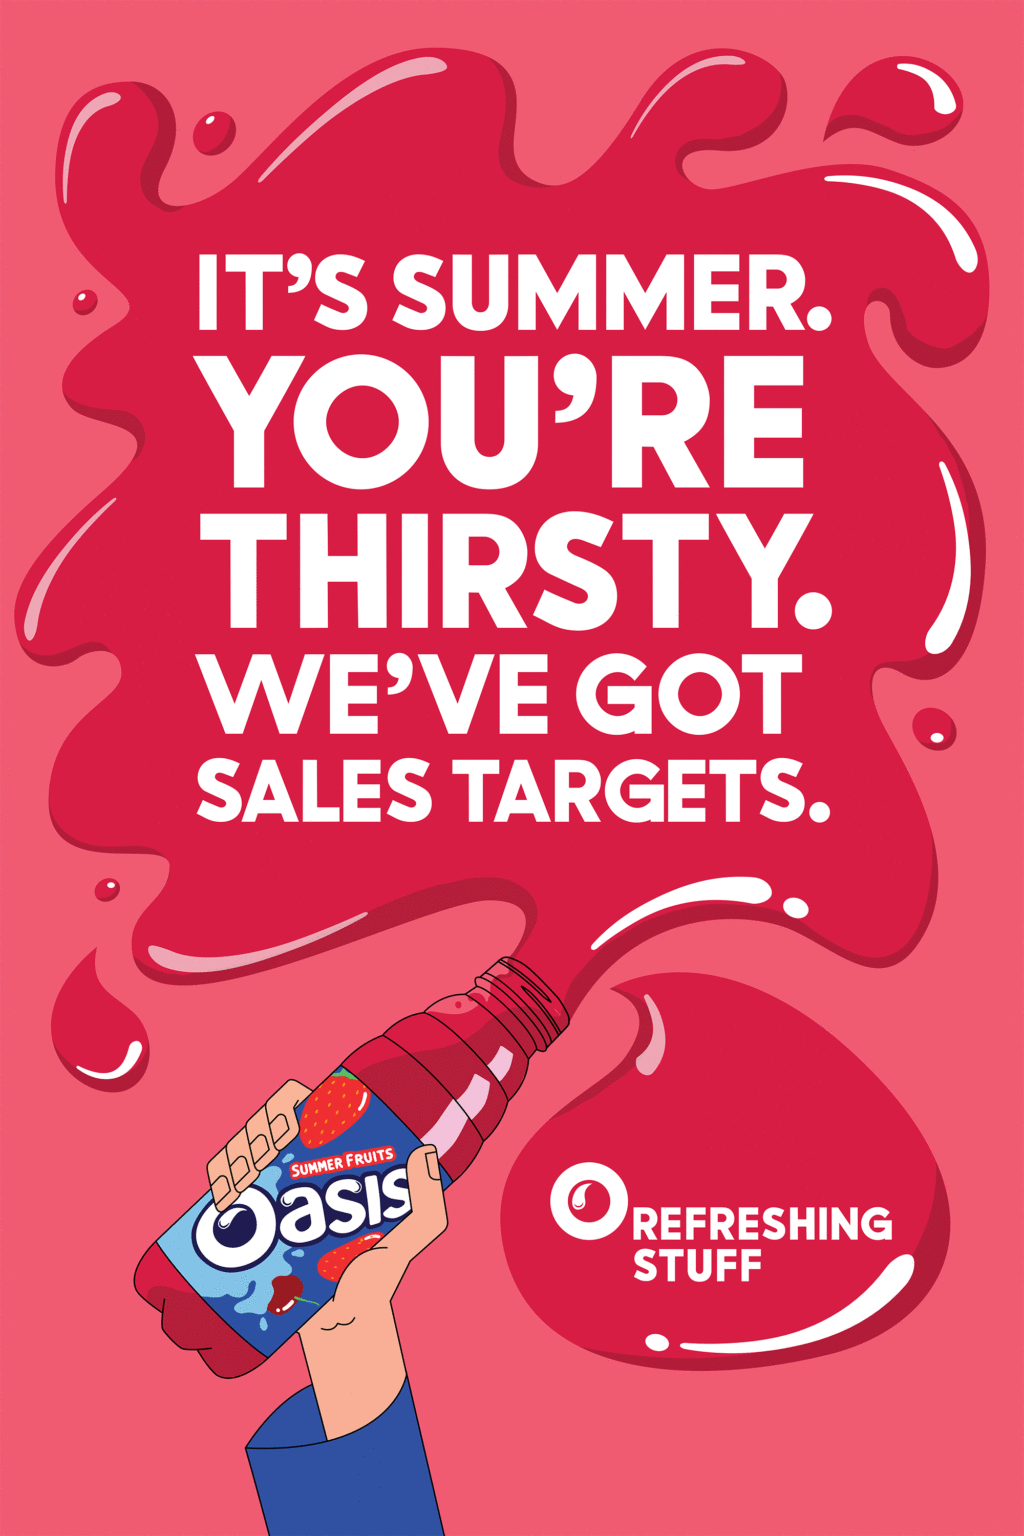 O Refreshing Stuff – campaign poster by Oasis